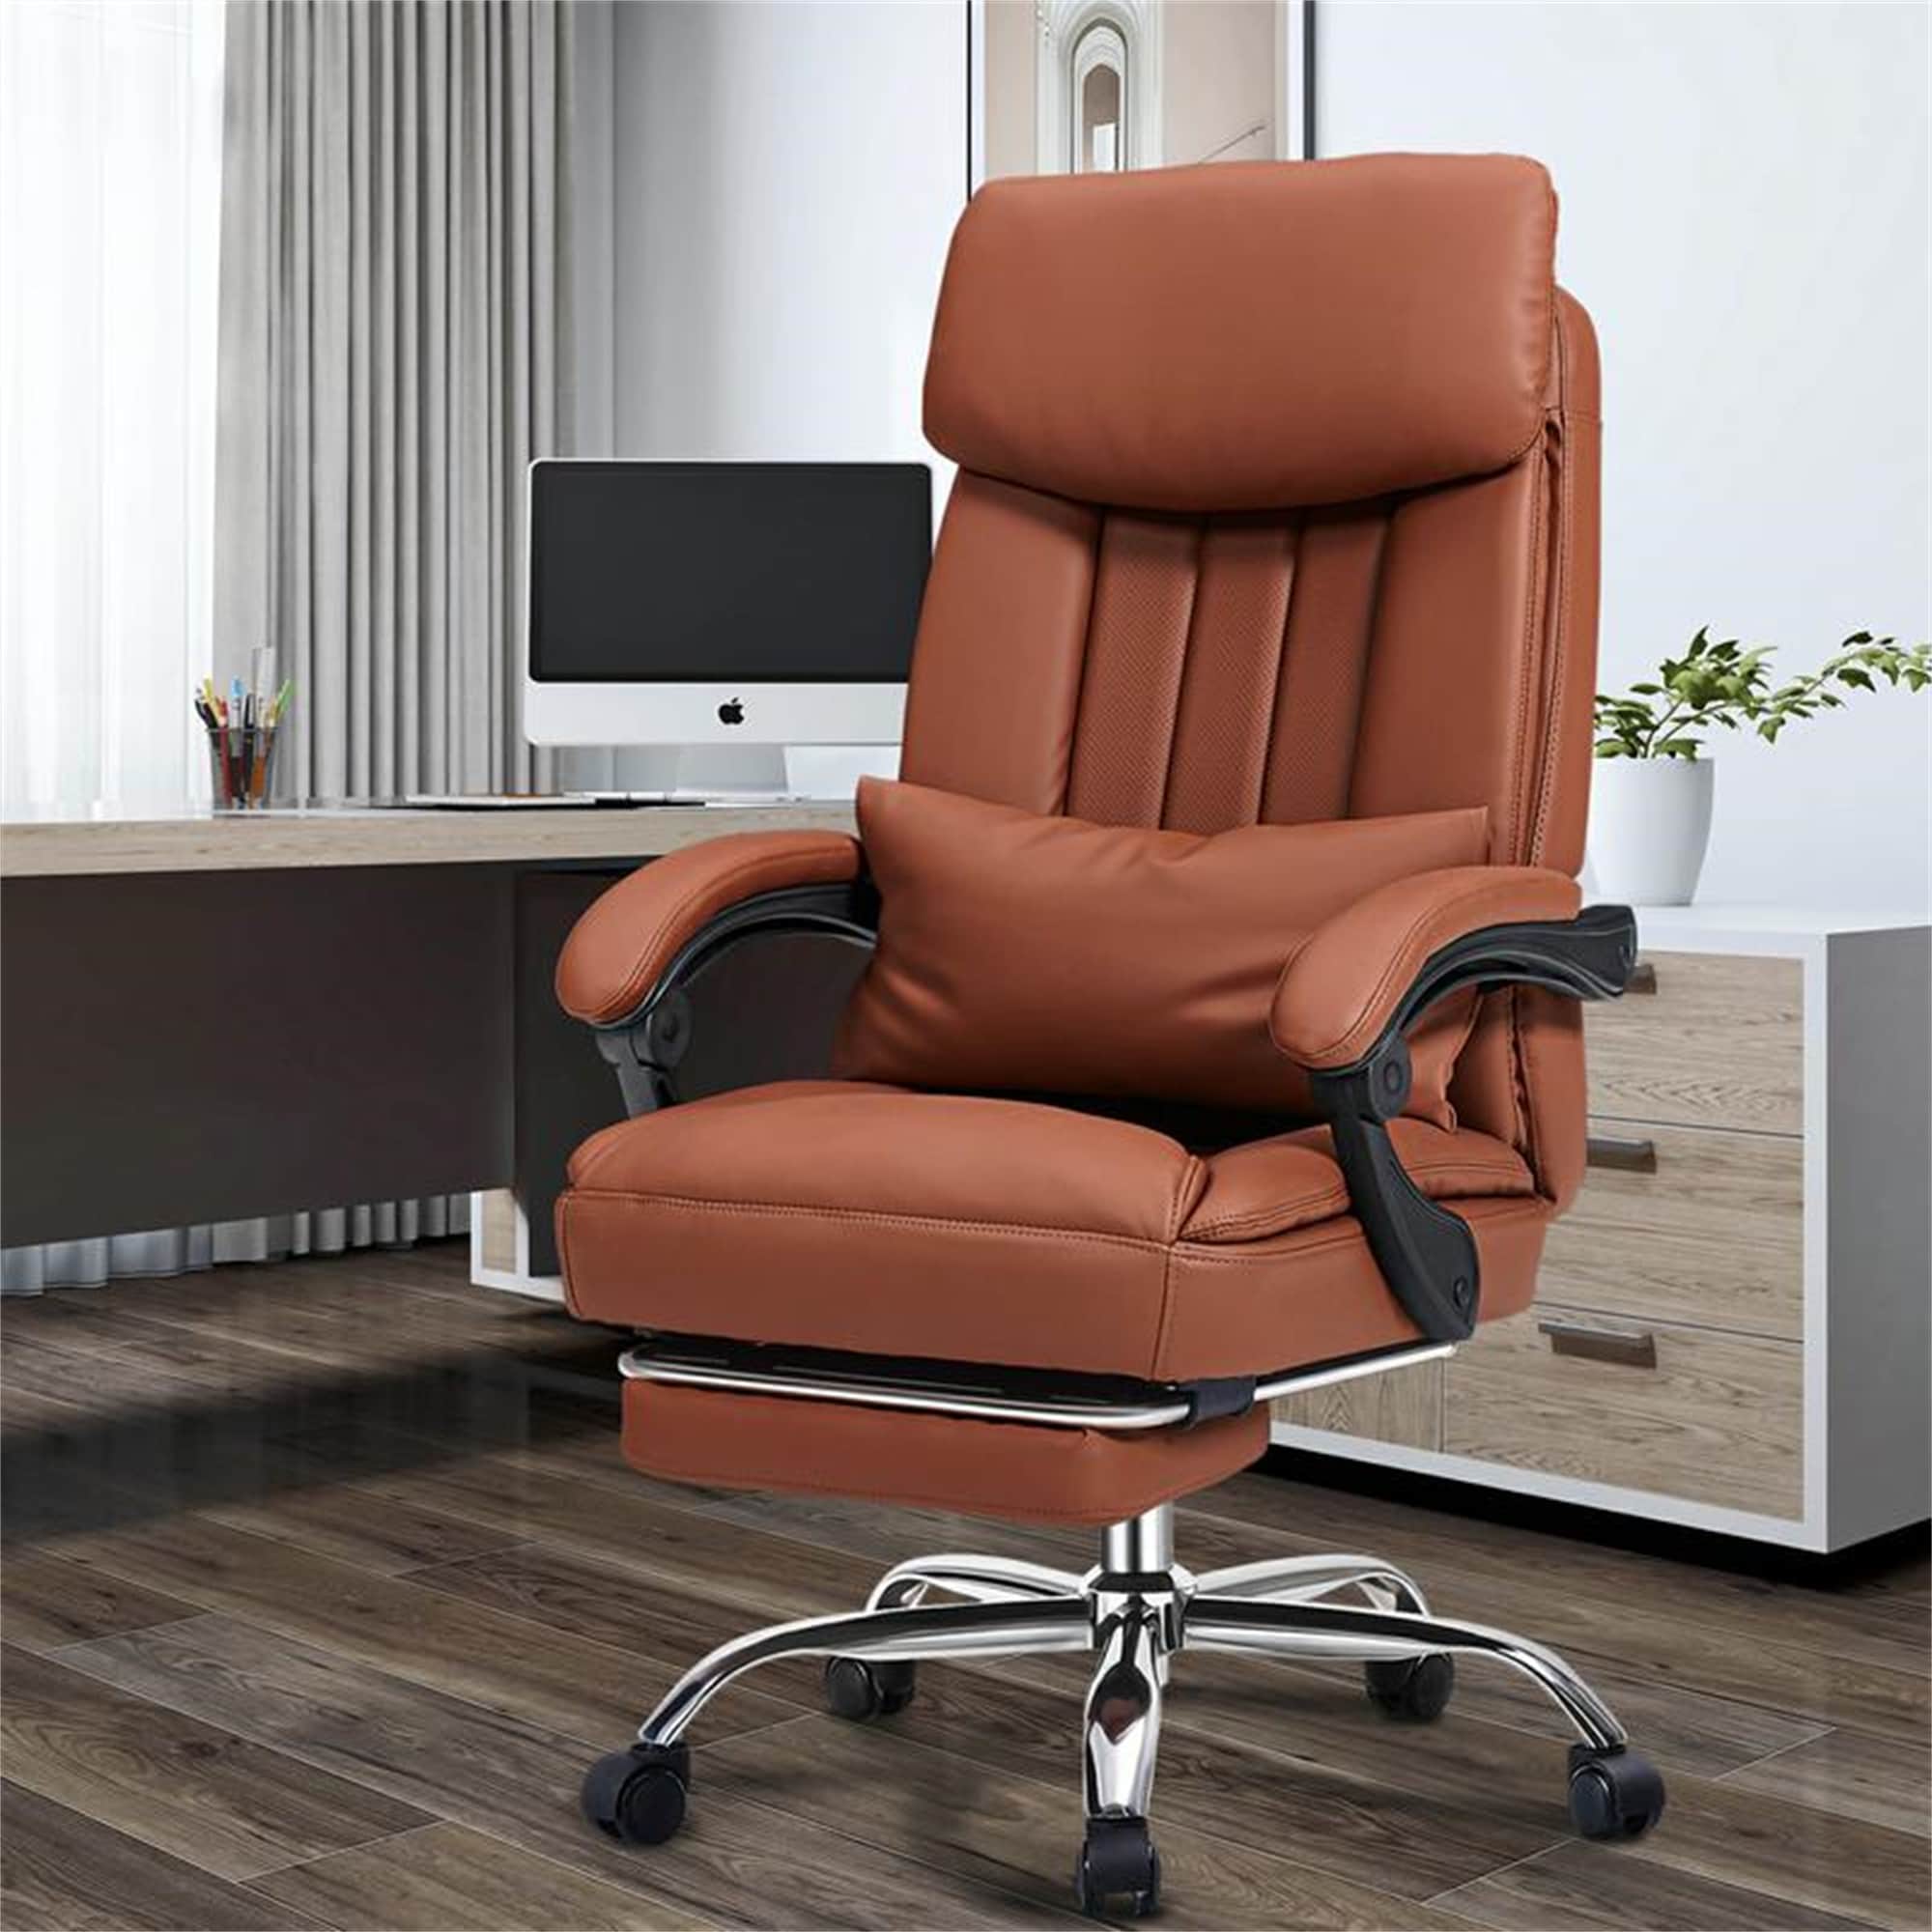 https://ak1.ostkcdn.com/images/products/is/images/direct/bcc1aeda3280a78ce170a52dd1fd2c6a5ae49fae/Executive-Chair%2C-High-Back-Leather-Desk-Chair-W--Retractable-Footrest.jpg